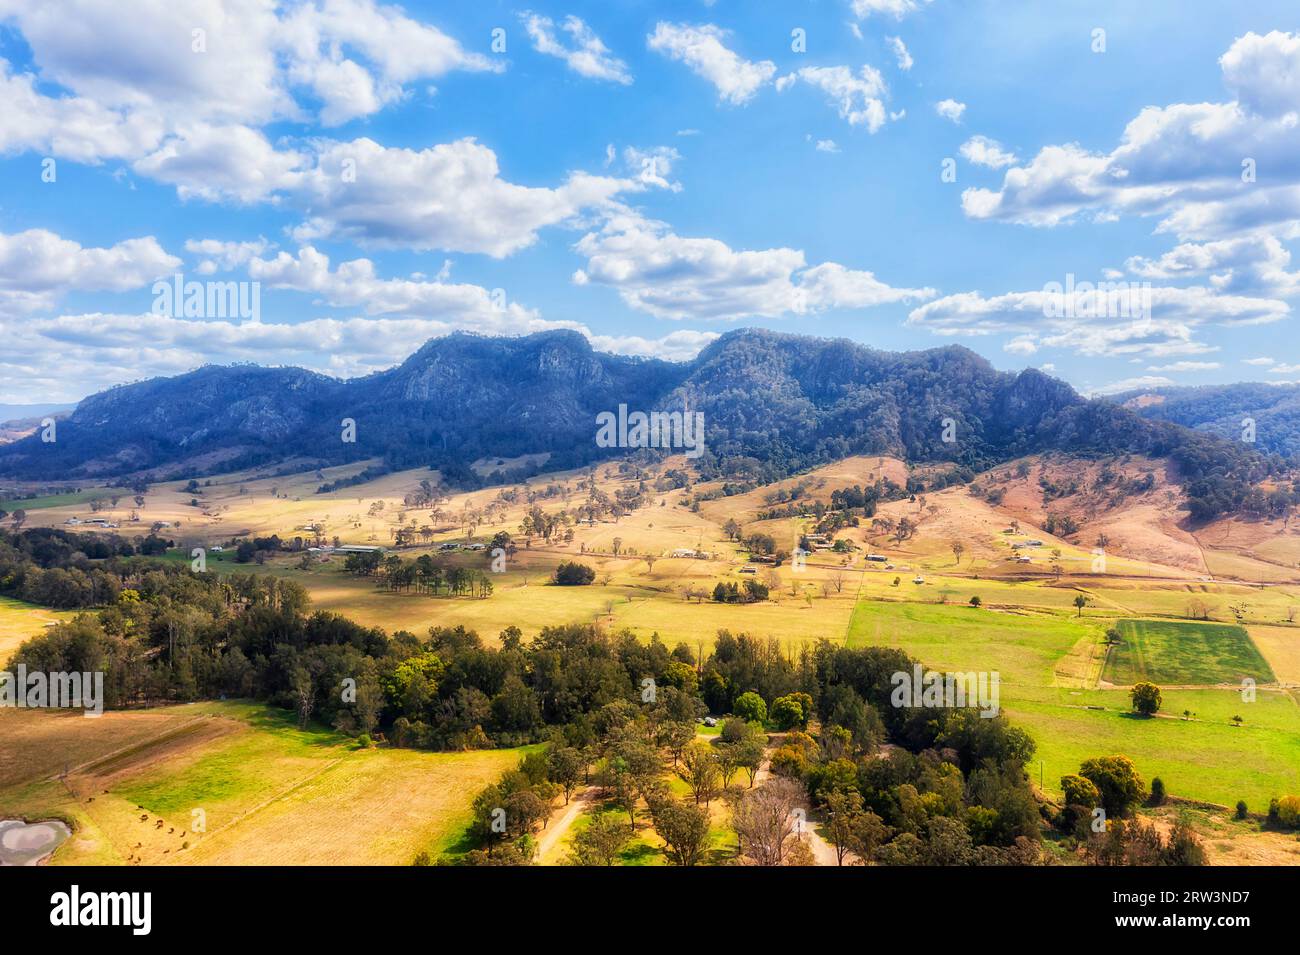 Green pastures of cattle farms aroudn Gloucester town at Barrington tops mountains in Australia - aerial landscape. Stock Photo